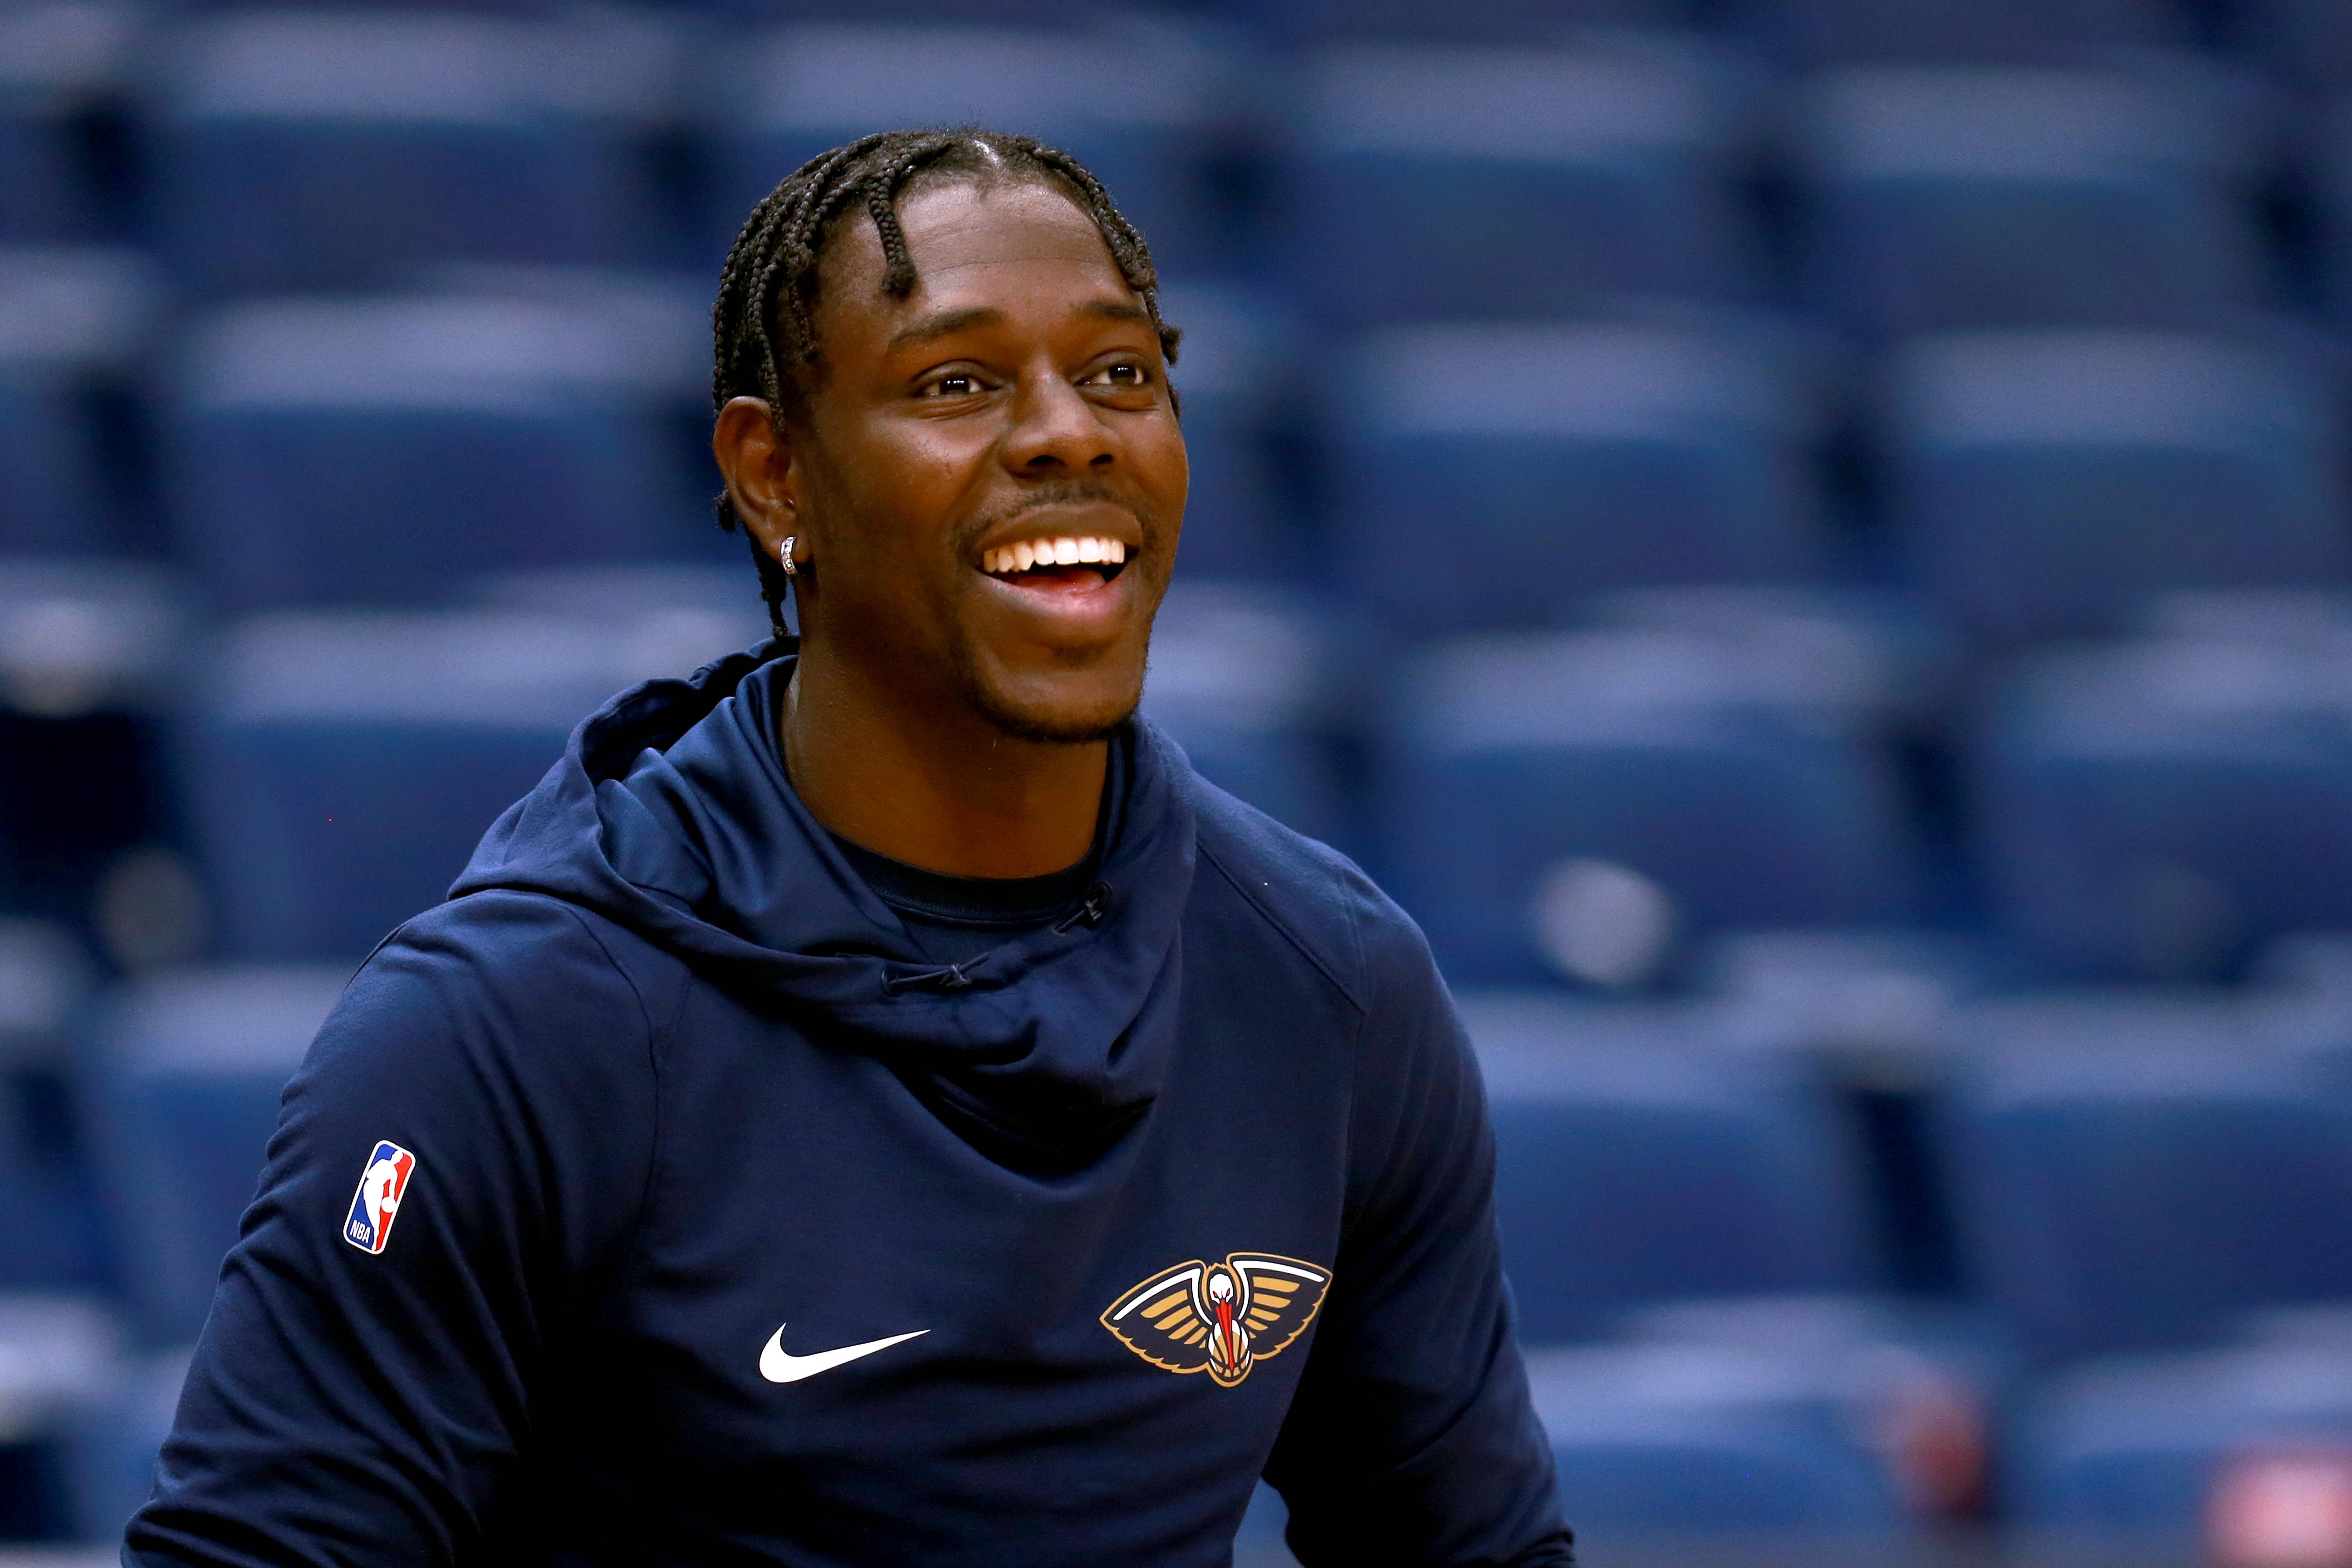 NEW ORLEANS, LOUISIANA - NOVEMBER 11: Jrue Holiday #11 of the New Orleans Pelicans stands on the court prior to the start of a NBA game against the Houston Rockets at the Smoothie King Center on November 11, 2019 in New Orleans, Louisiana. NOTE TO USER: User expressly acknowledges and agrees that, by downloading and or using this photograph, User is consenting to the terms and conditions of the Getty Images License Agreement. (Photo by Sean Gardner/Getty Images)